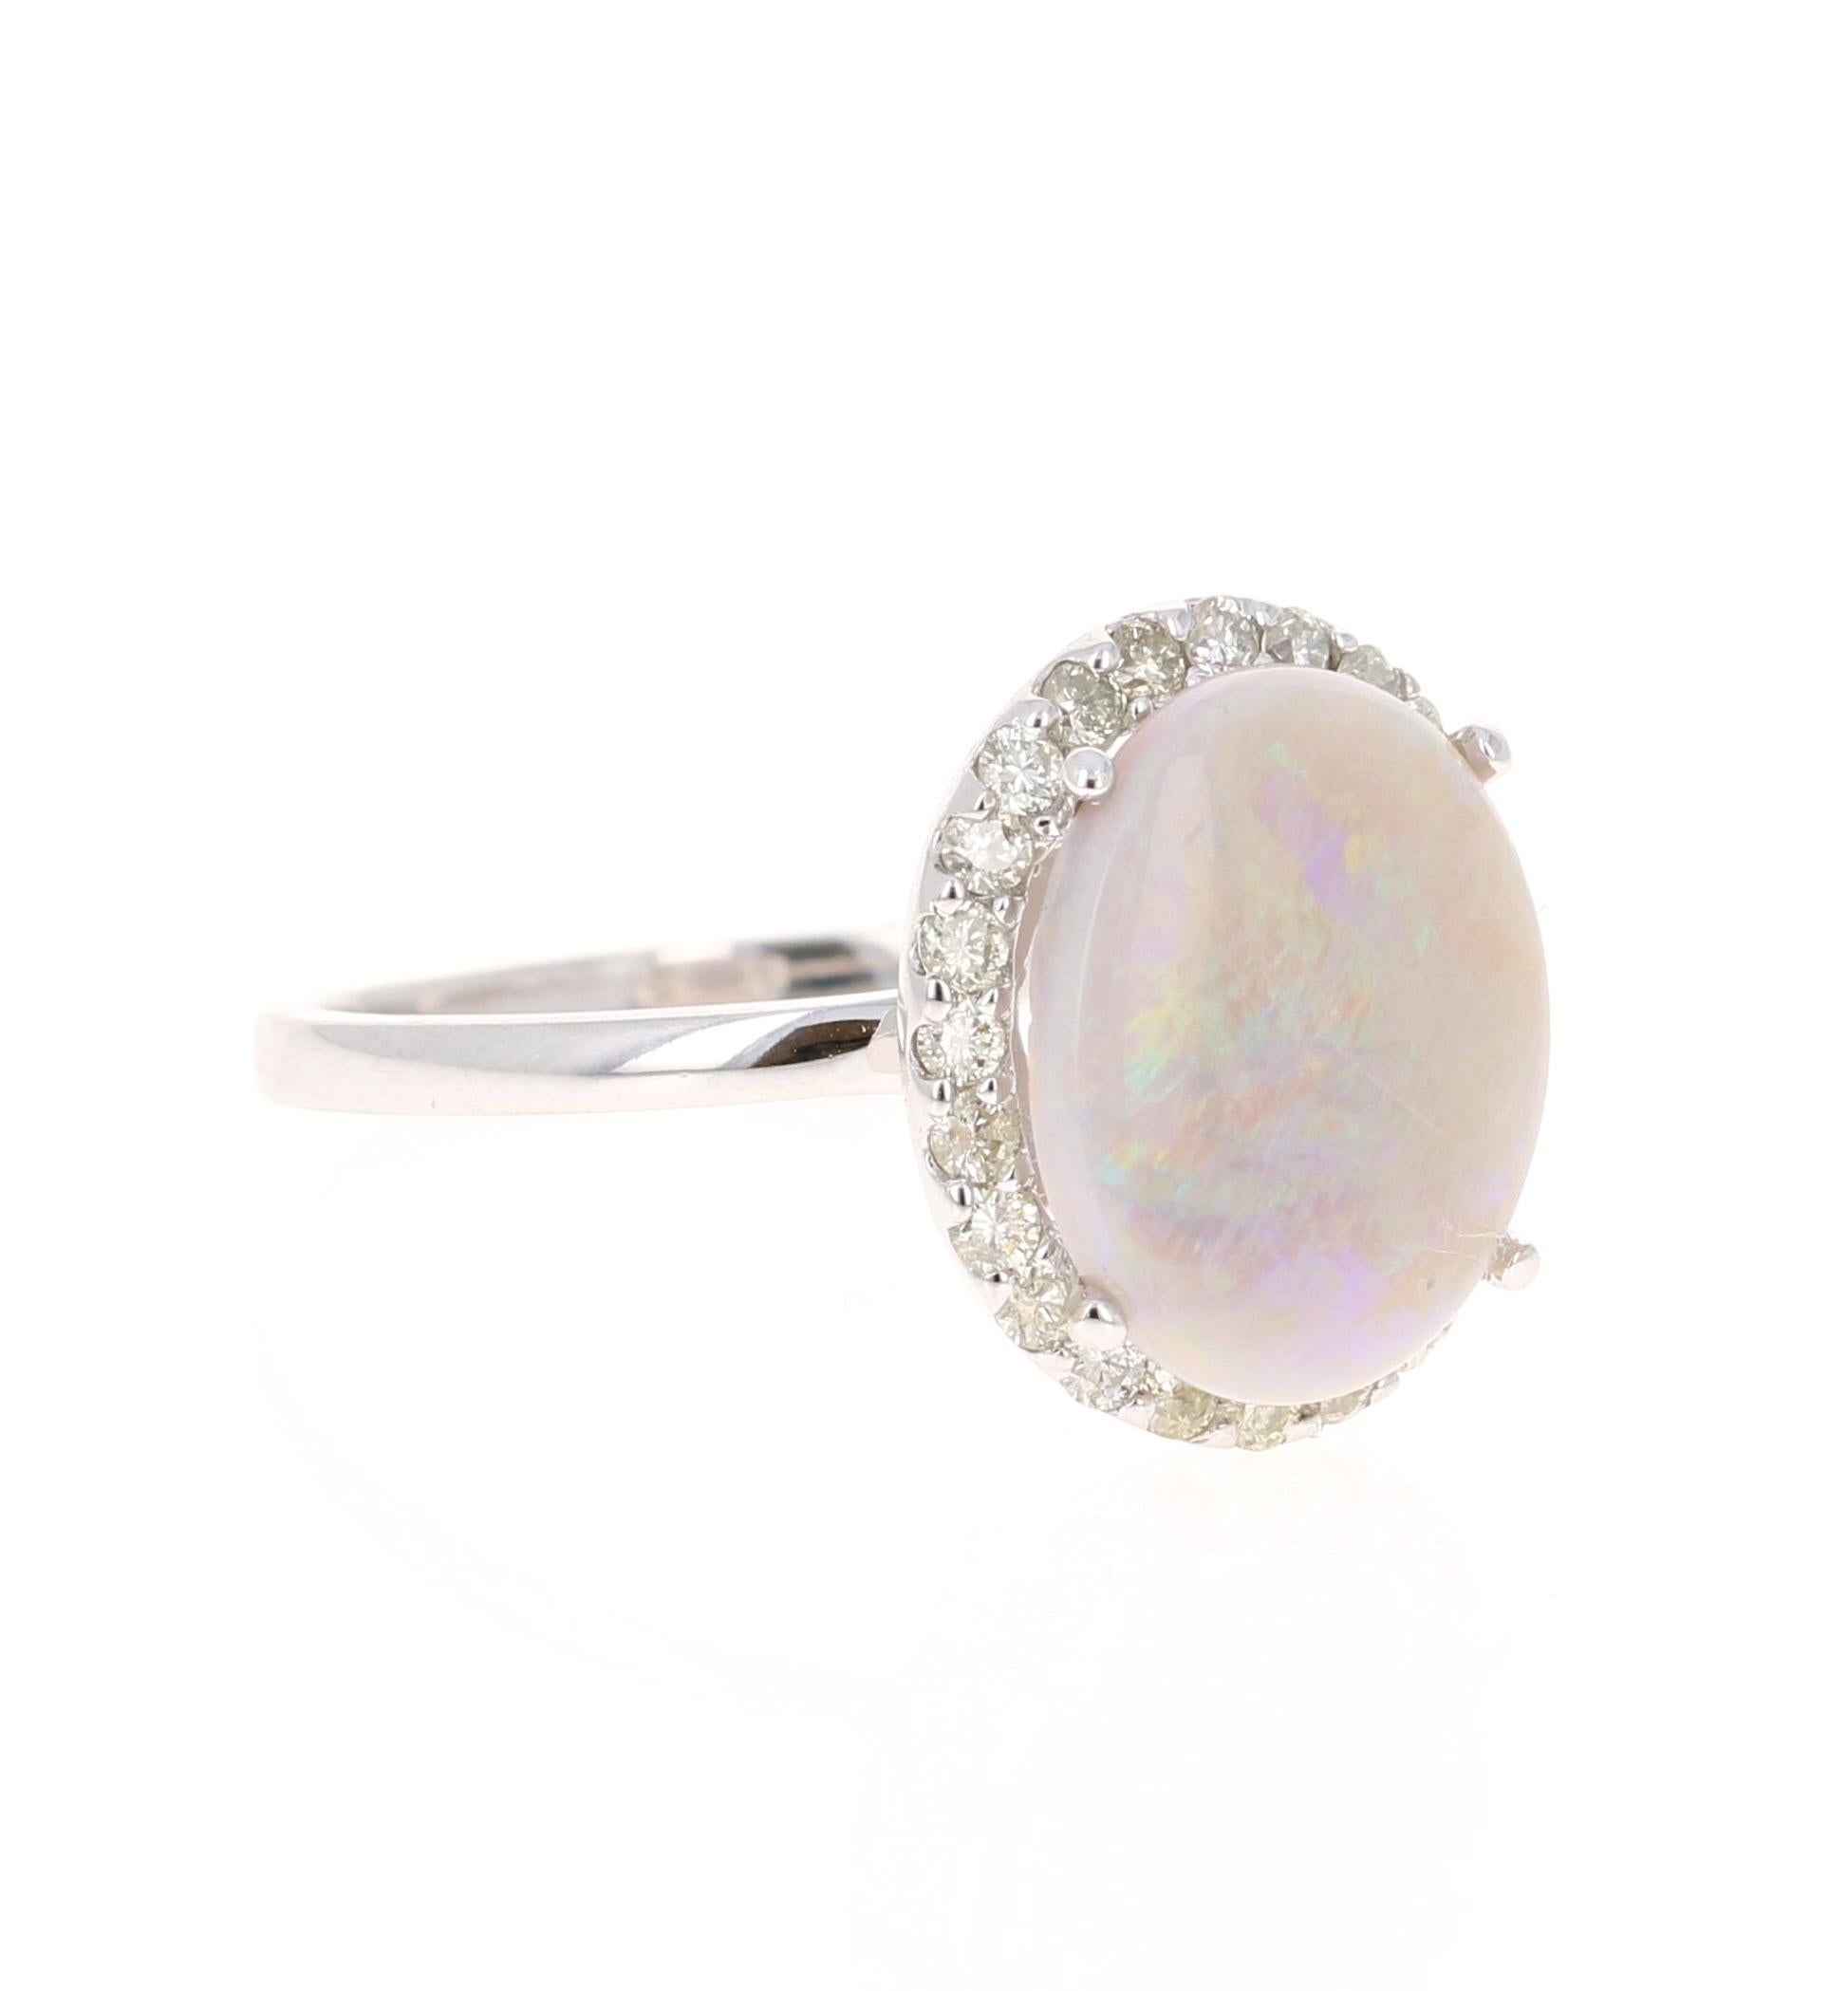 This ring has a simple 2.23 Carat Opal and has 24 Round Cut Diamonds that weigh 0.40 Carats. The total carat weight of the ring is 2.63 Carats. 

The Opal measures at  11 mm x 13 mm (width x length) 

The Opal is semi transparent and has flashes of